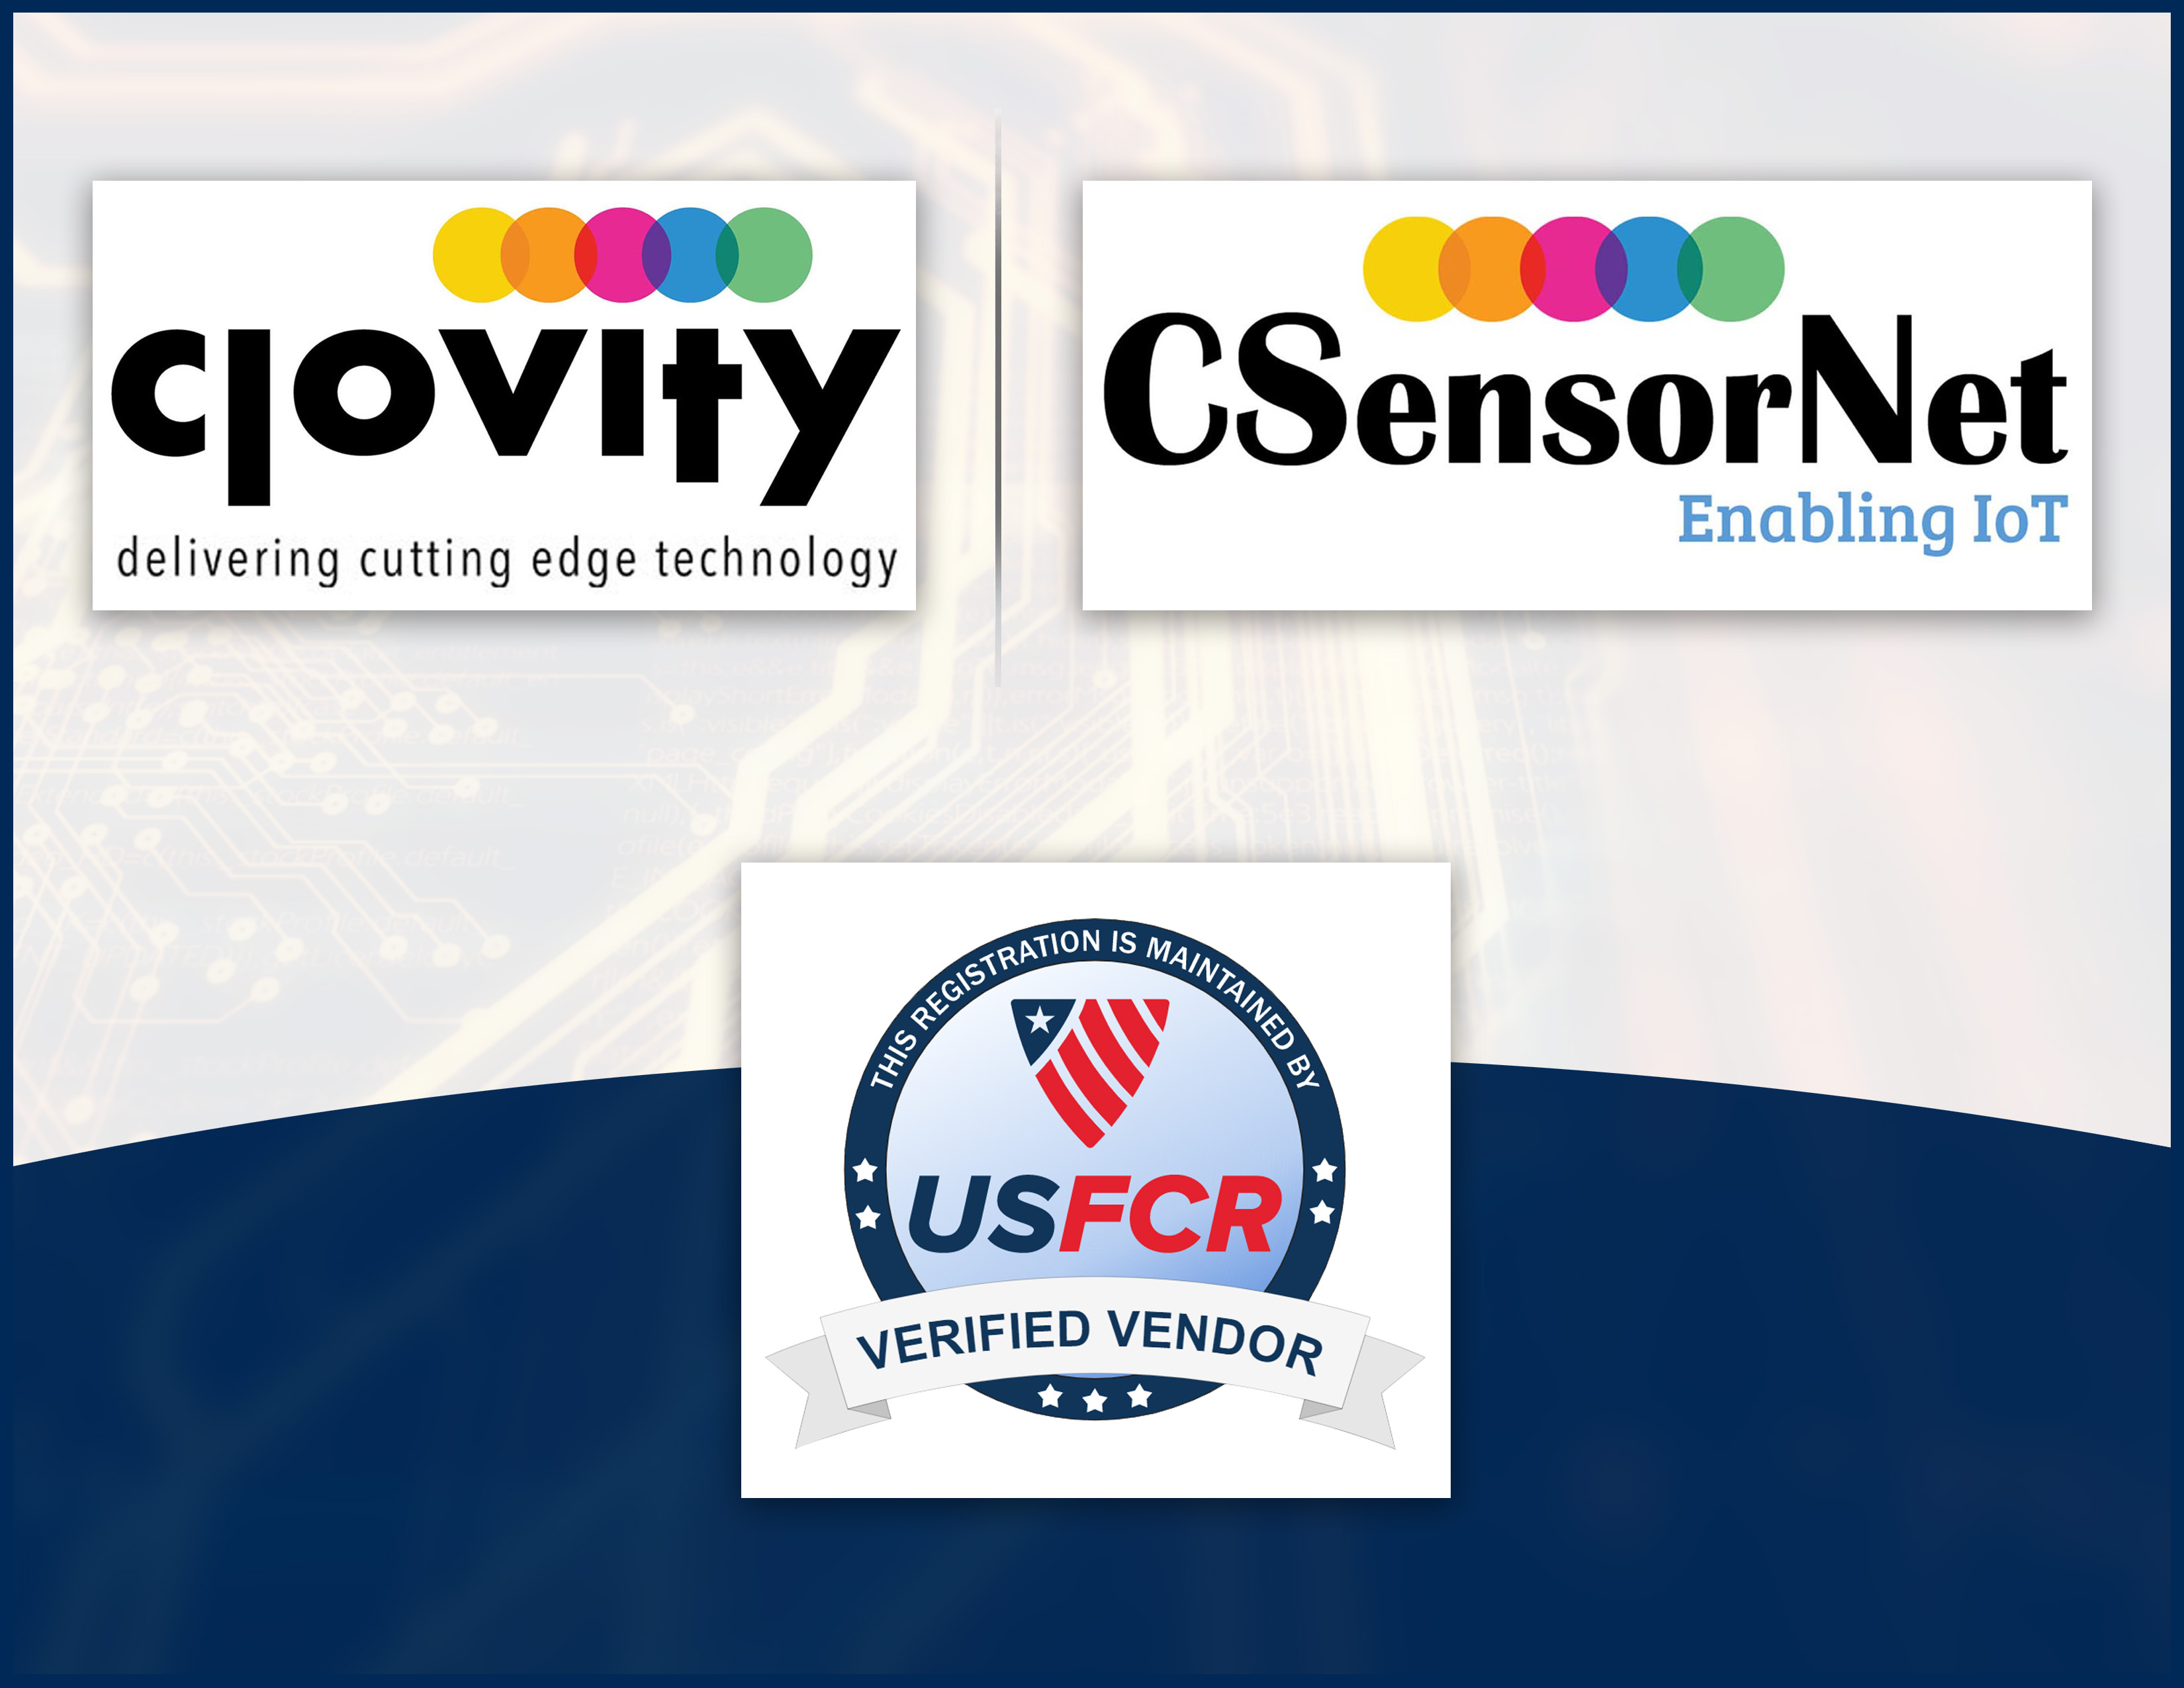 Clovity Brings Its CSensorNet IoT Platform & Professional Services Capabilities to Cities, States, & Government Entities Across the US as a Federally Approved Contractor